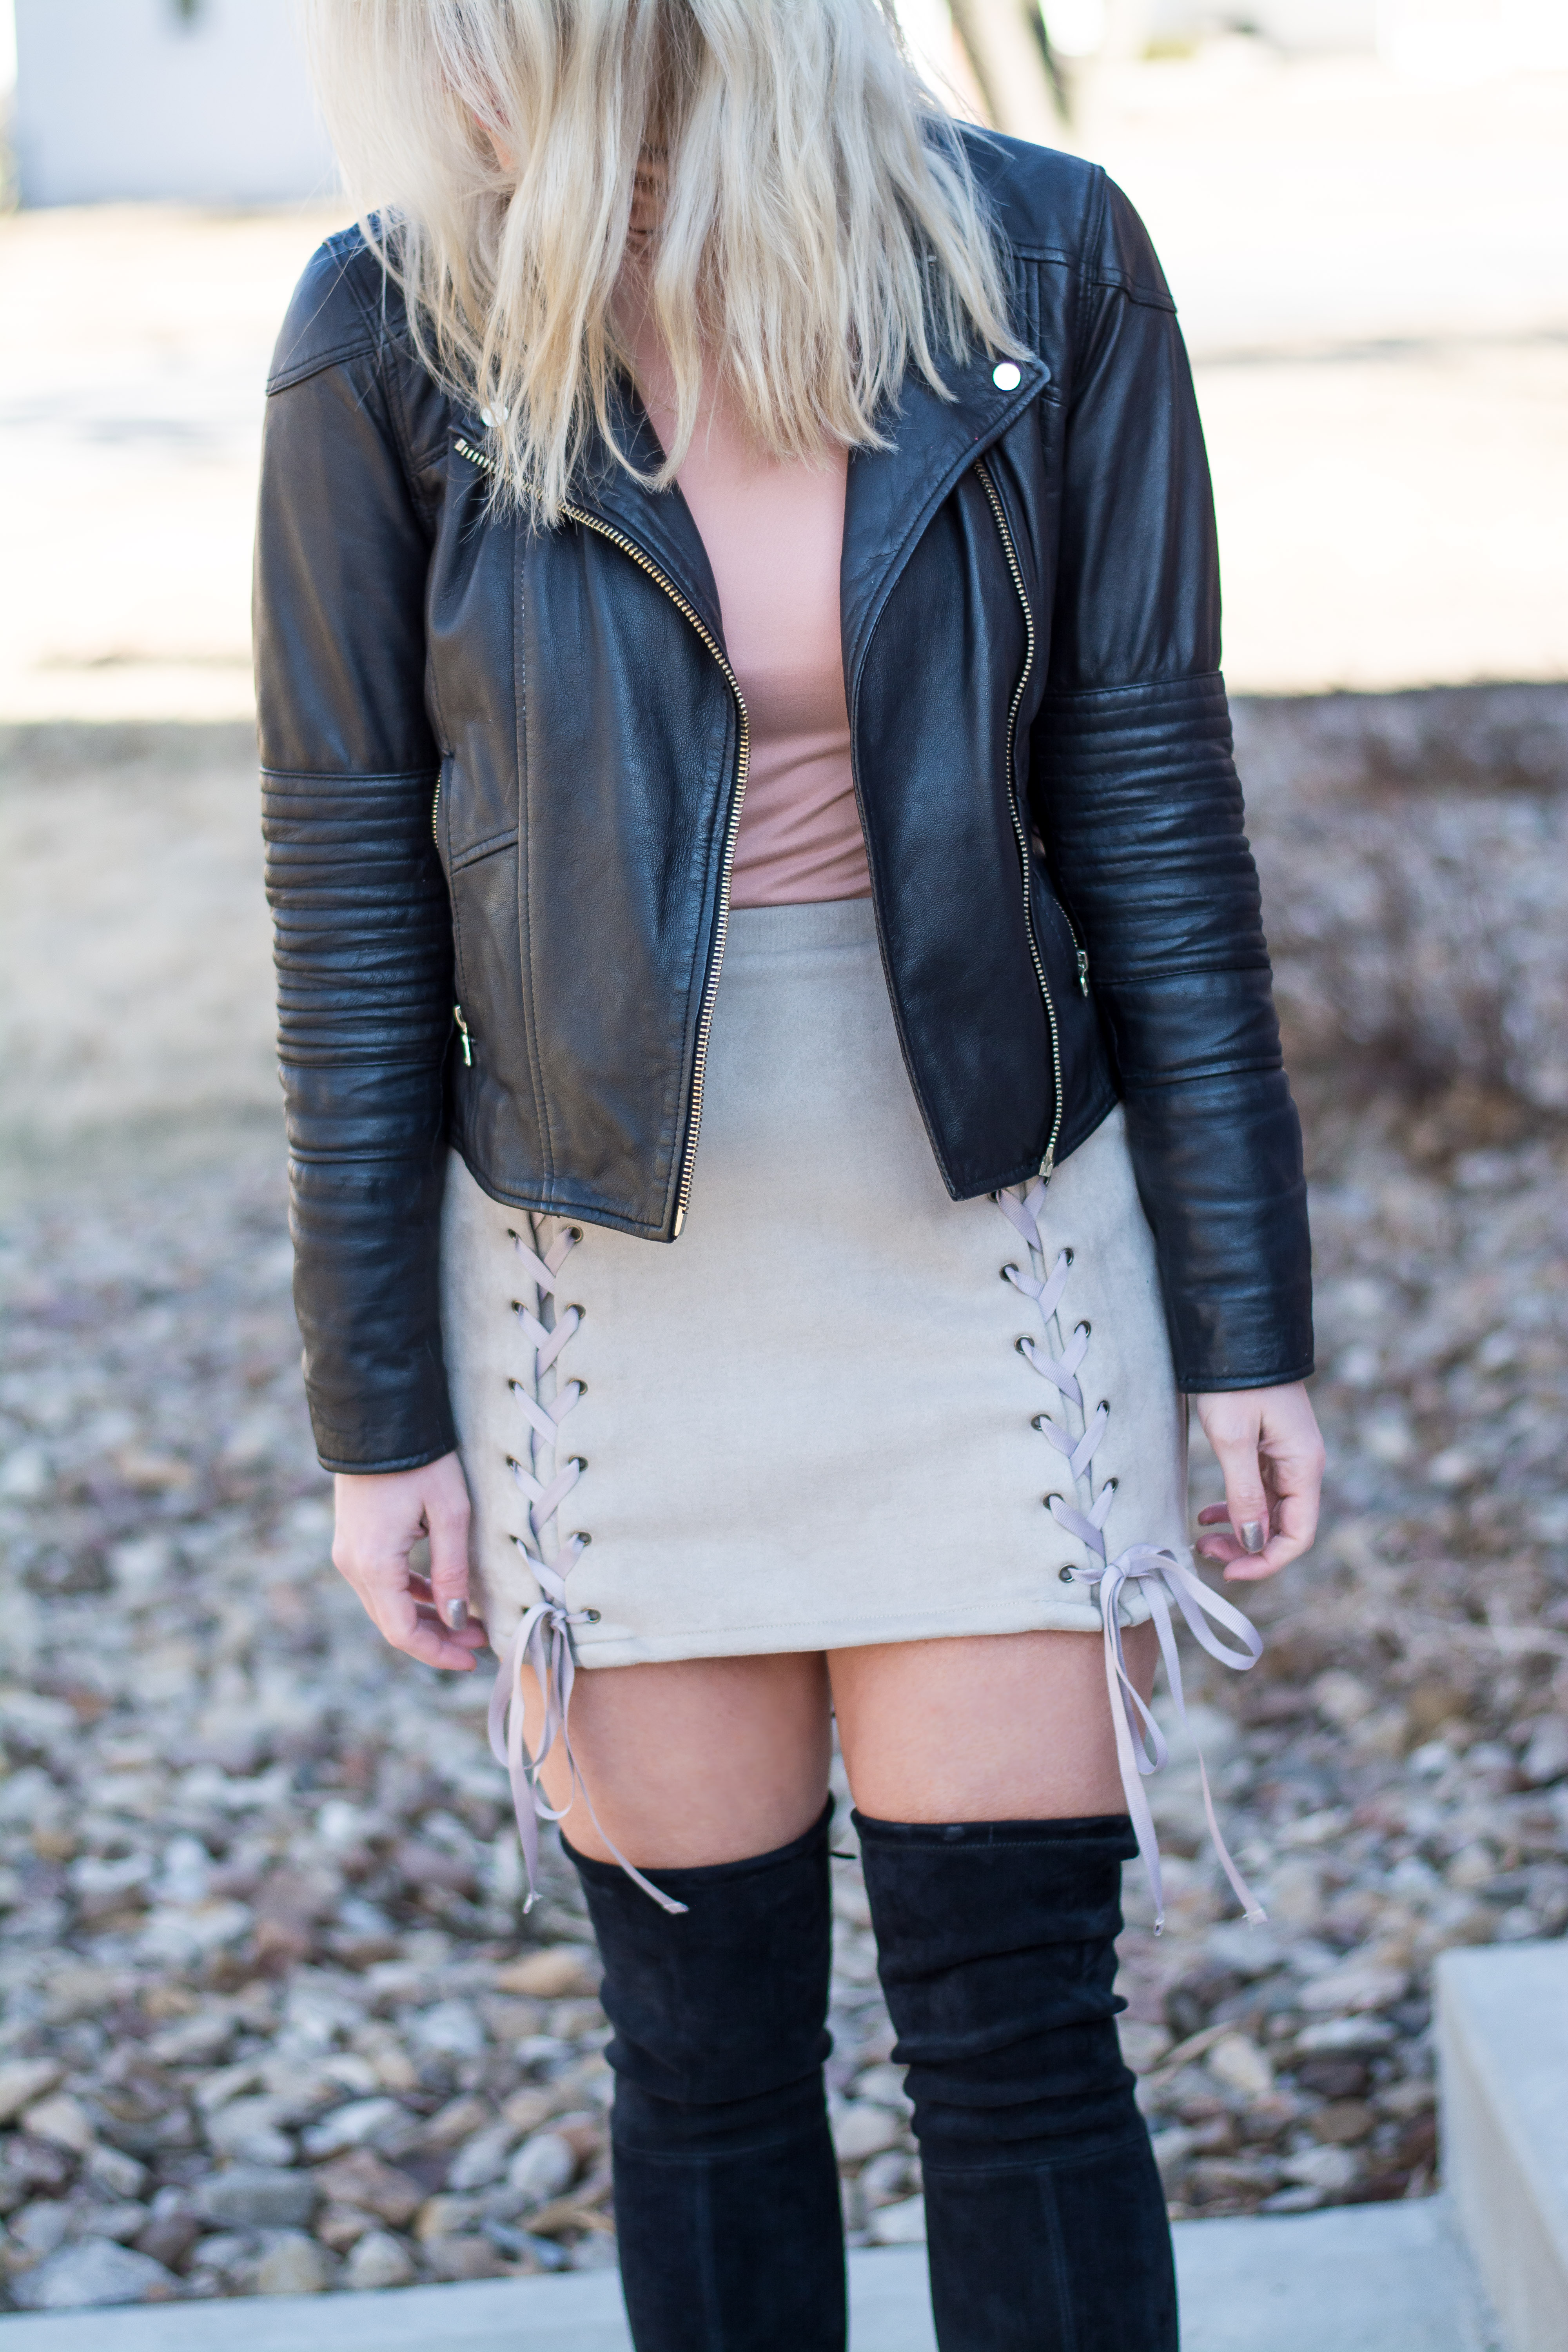 Spring Outfit: Suede Mini Skirt + Tall Boots. | Ashley from LSR